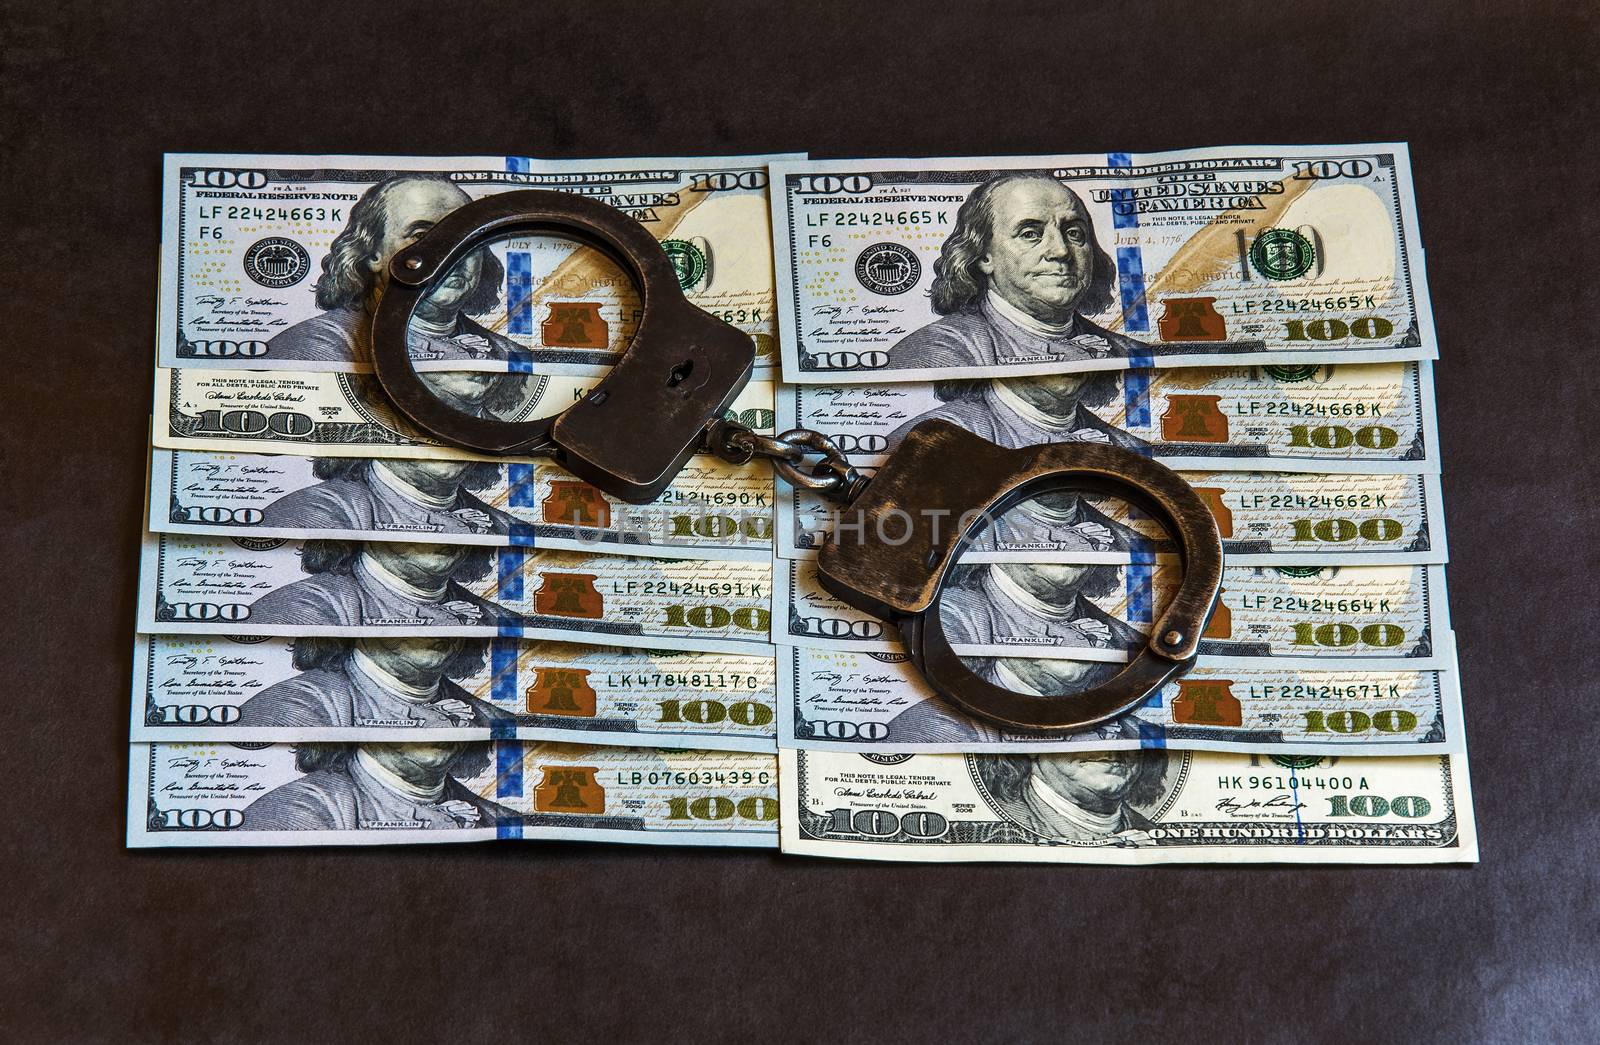 The handcuffs are on banknotes hundred dollars



